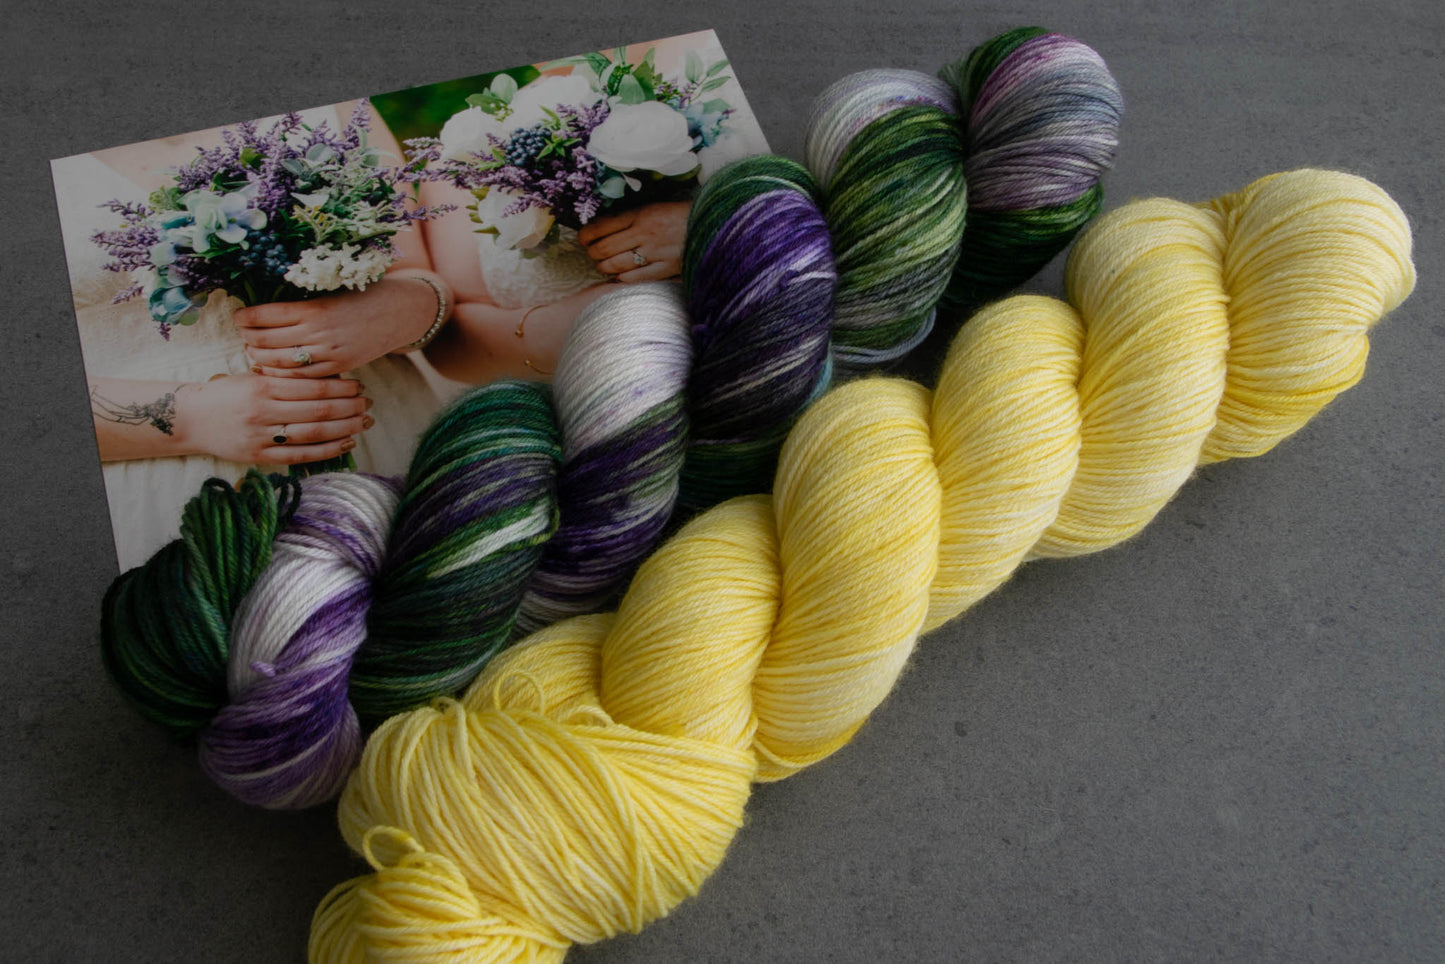 A skein of 4.26 with its complementary purple, green, and white variegated skein and a photo of Cat and Penny holding their wedding bouquets.